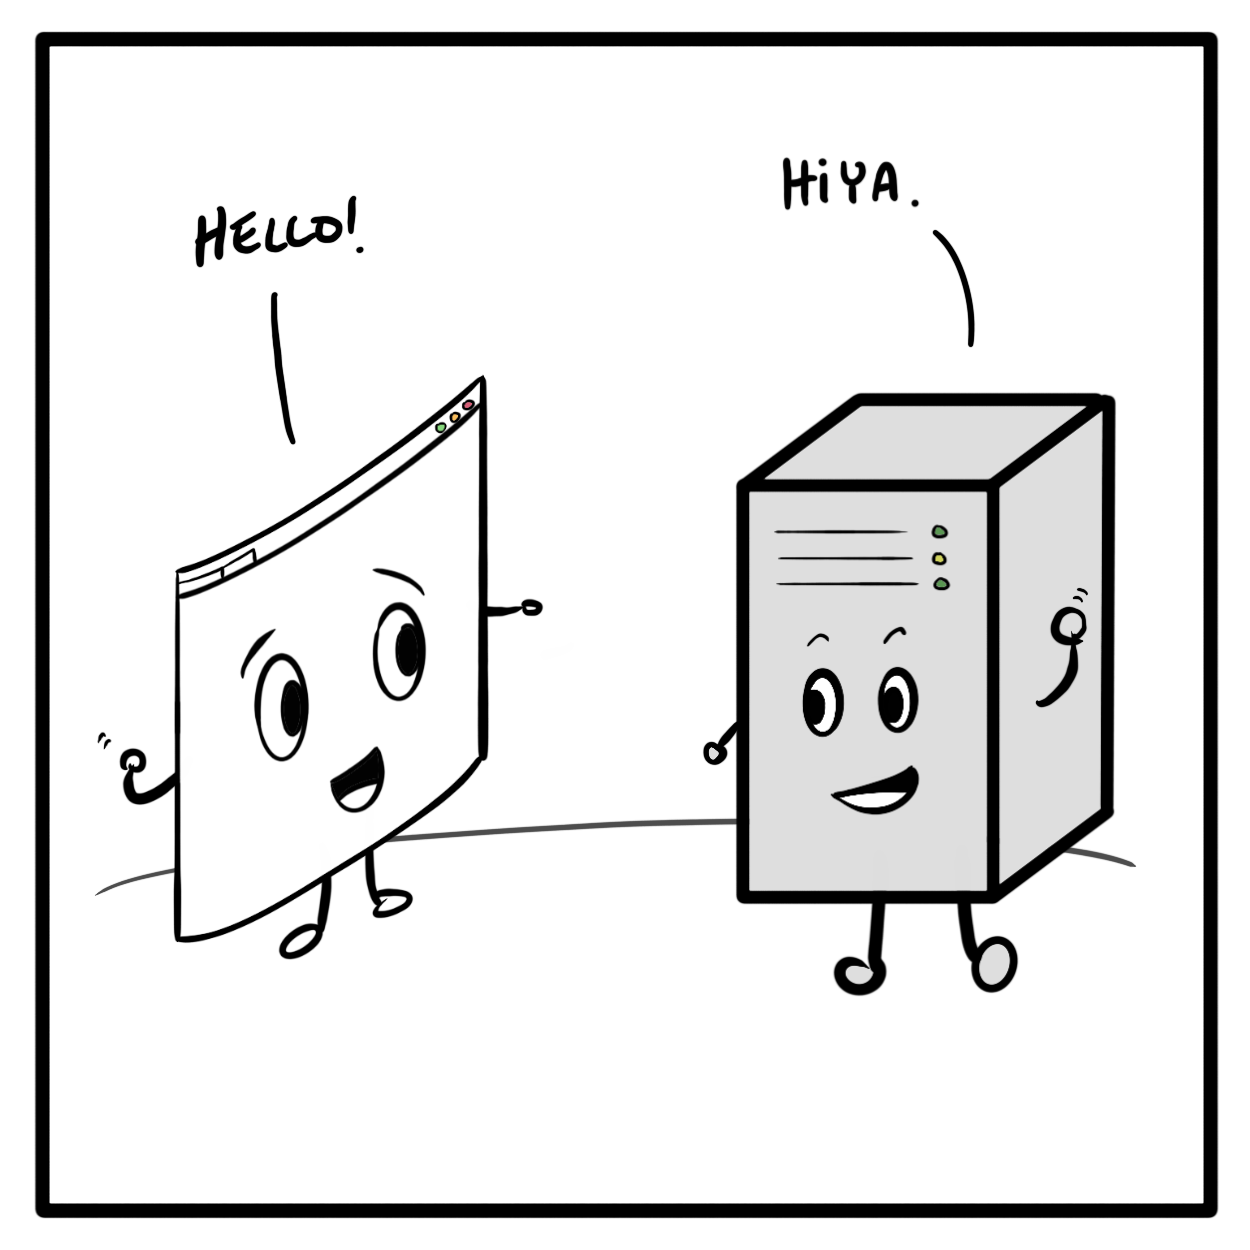 A cartoon of a client and server saying hello